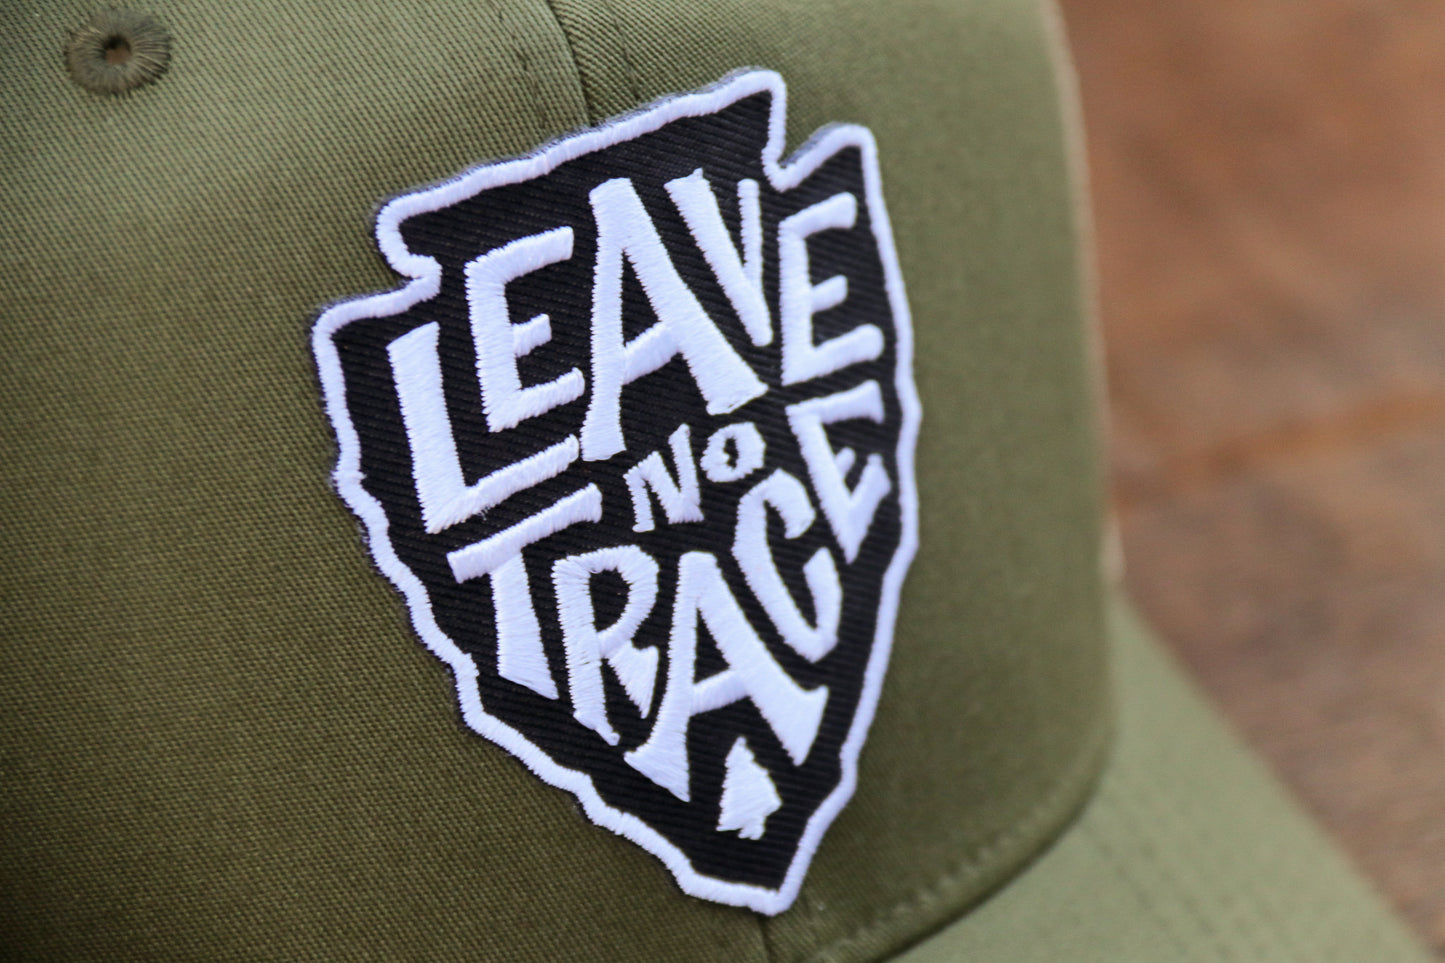 Leave No Trace Patch